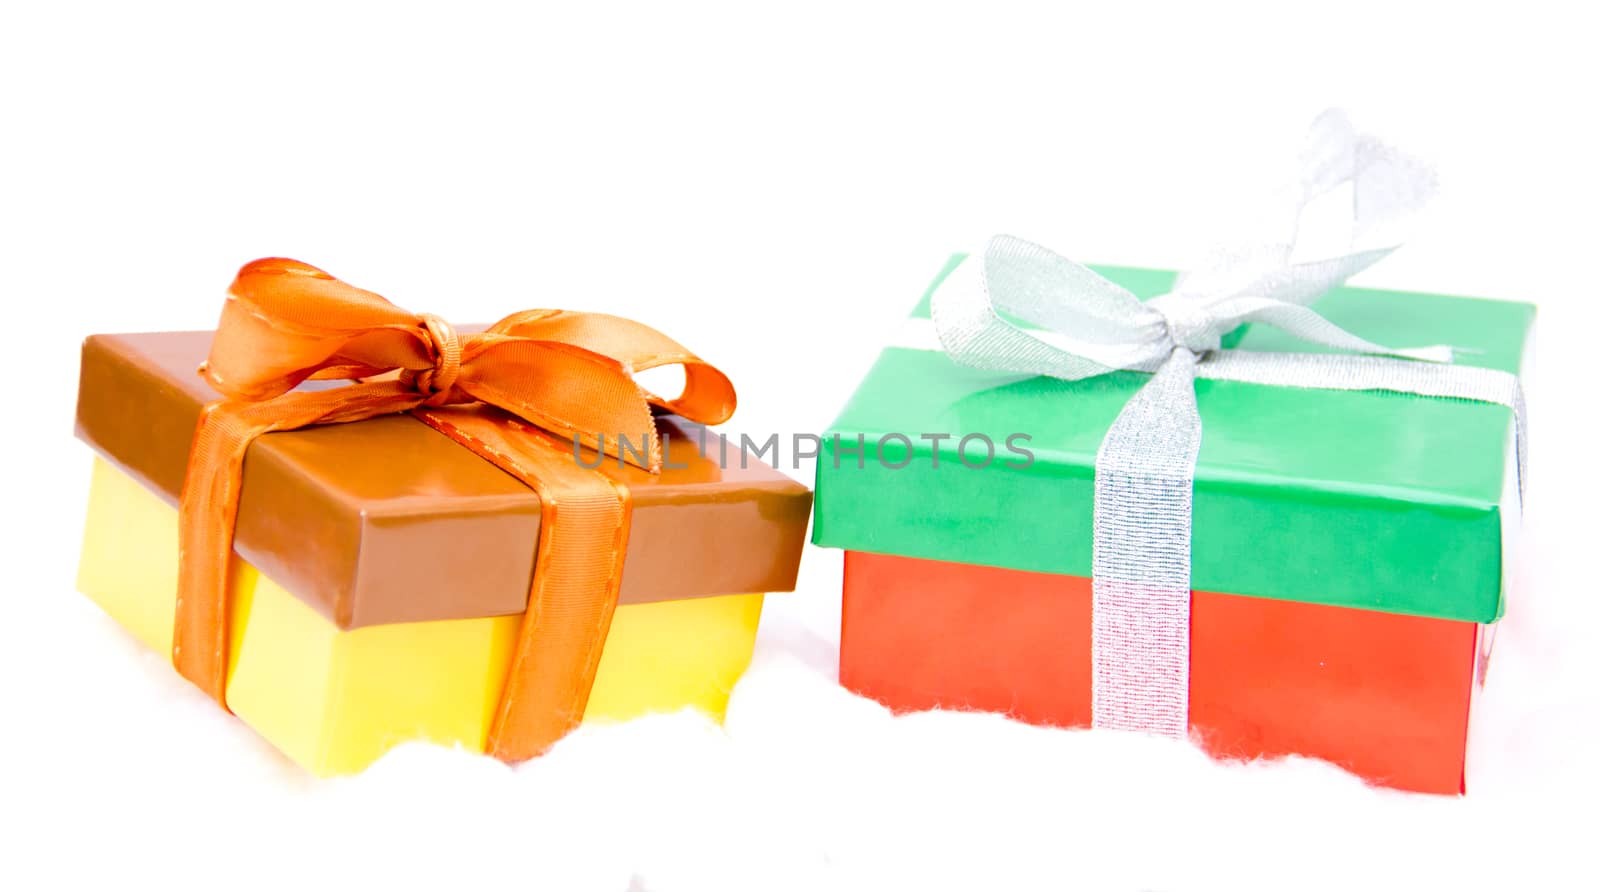 Christmas presents on white background viewed from front